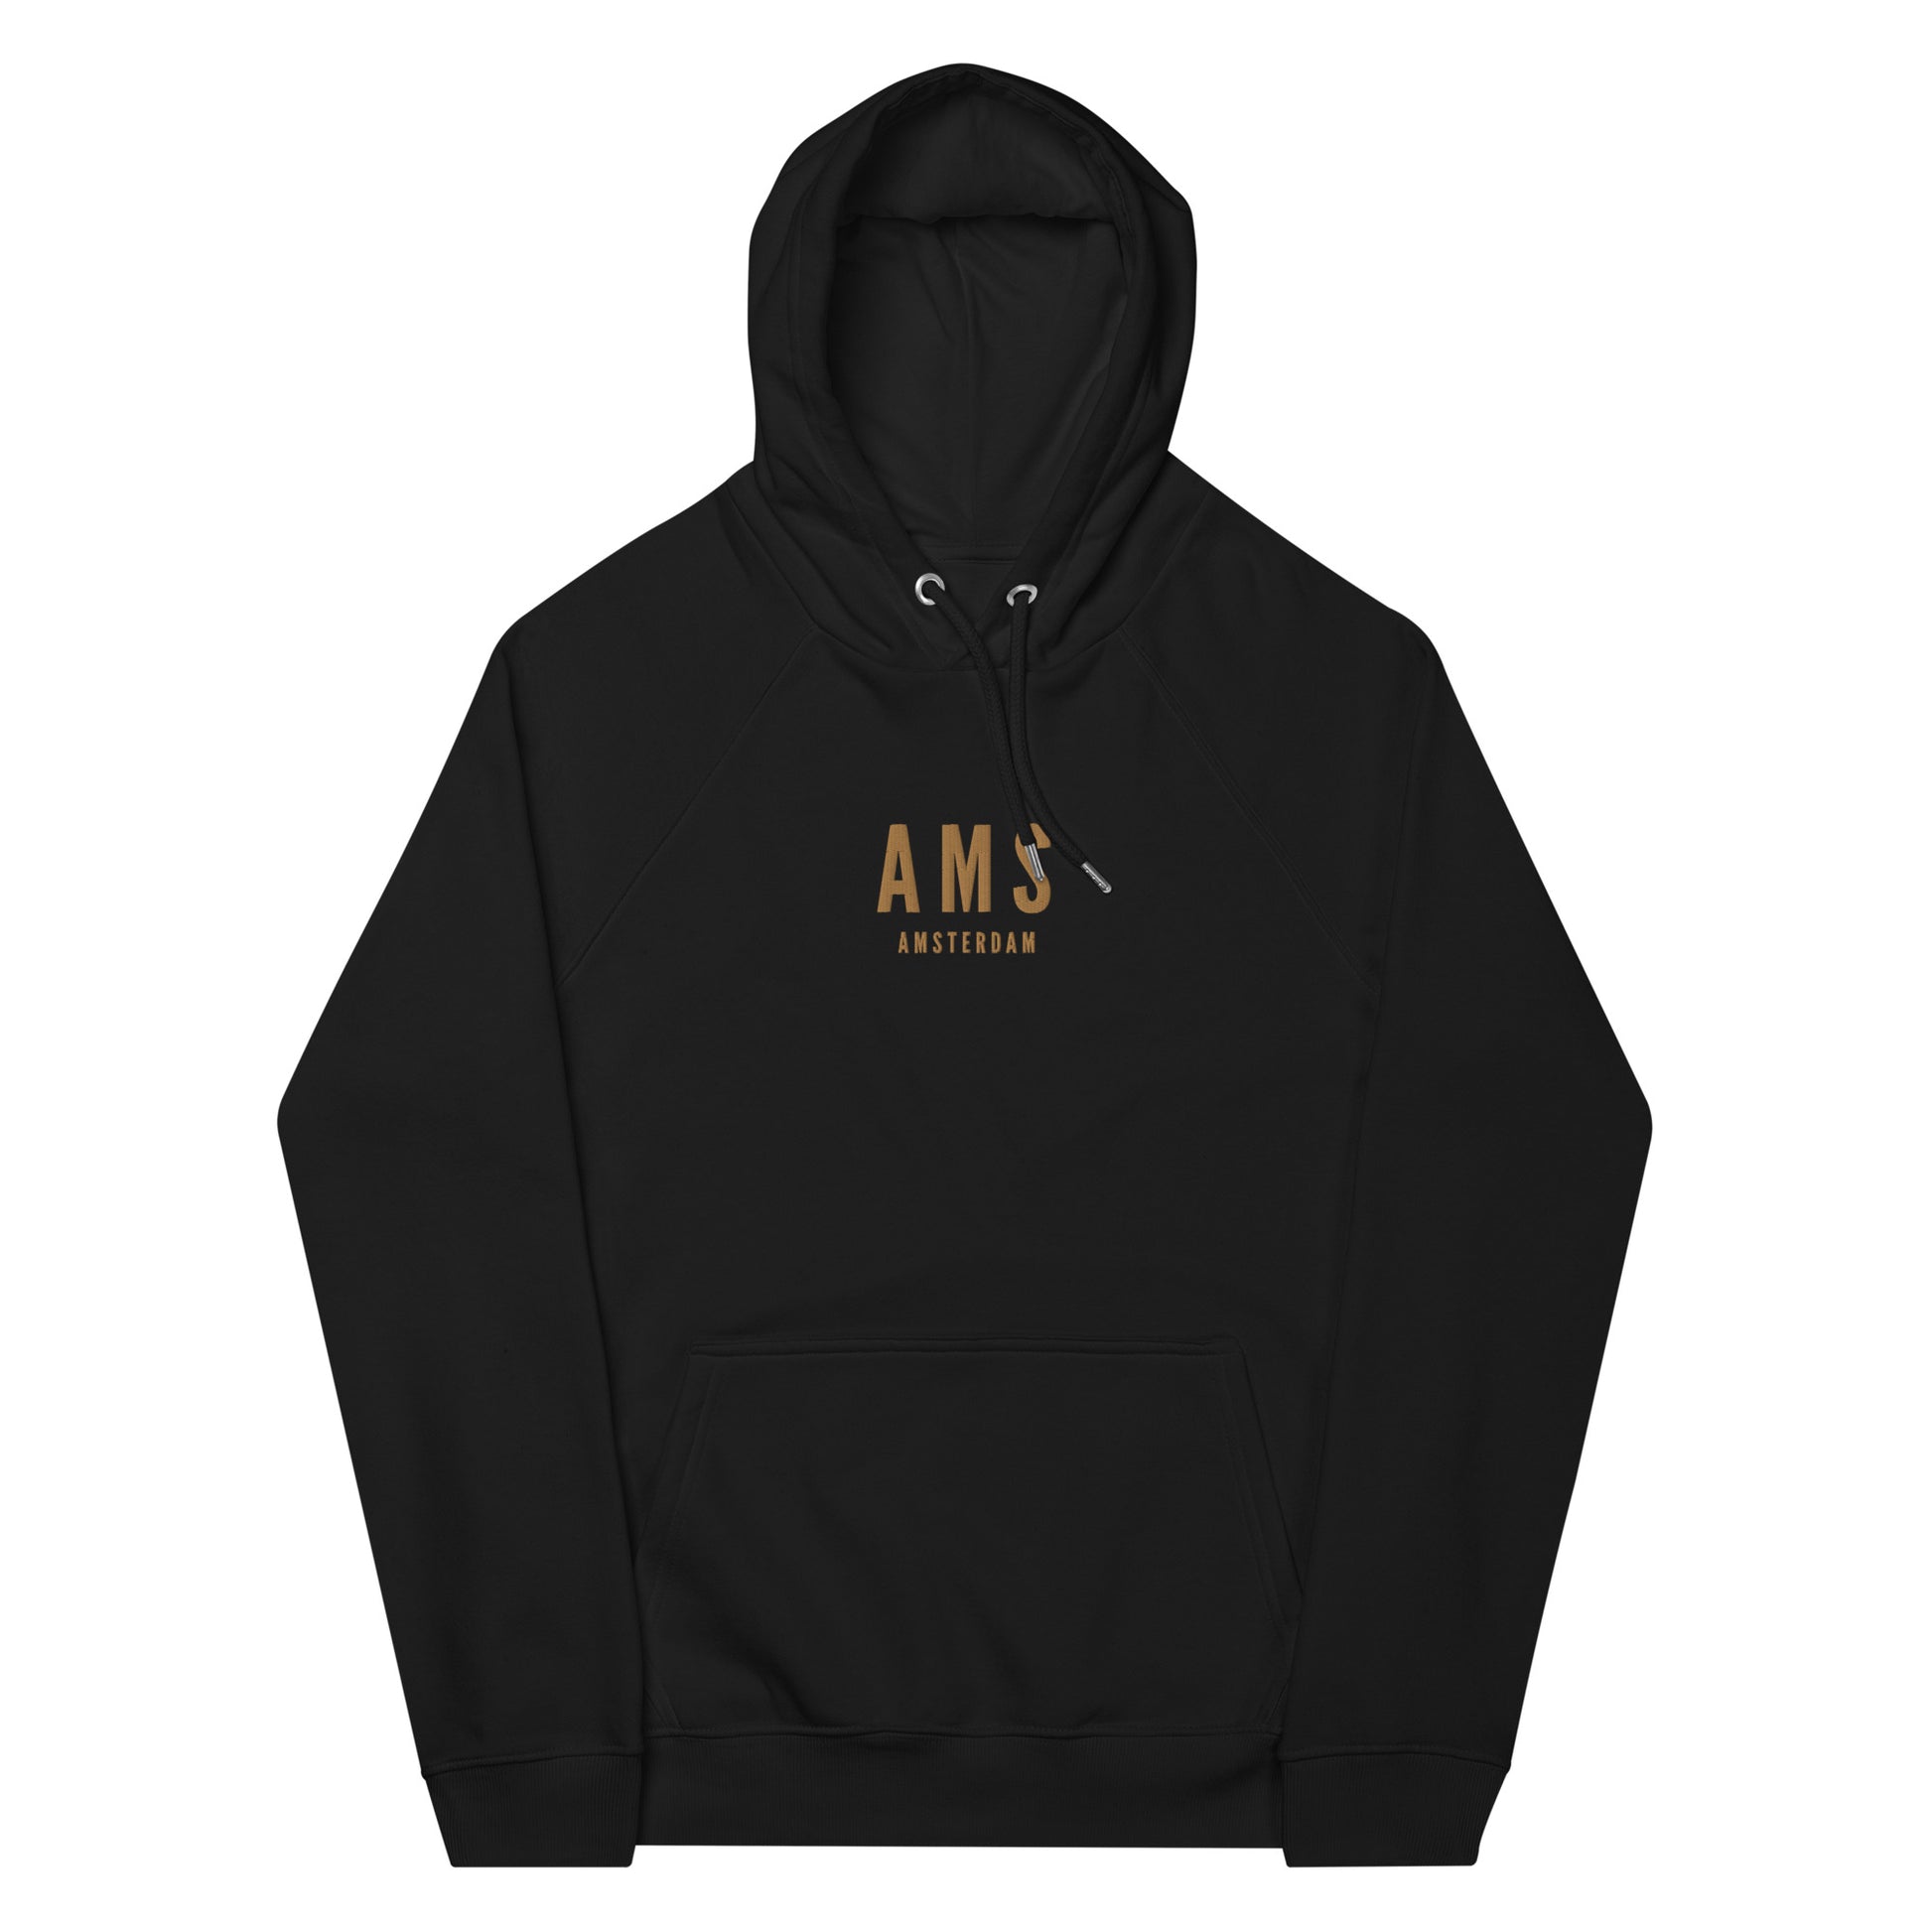 City Organic Hoodie - Old Gold • AMS Amsterdam • YHM Designs - Image 10